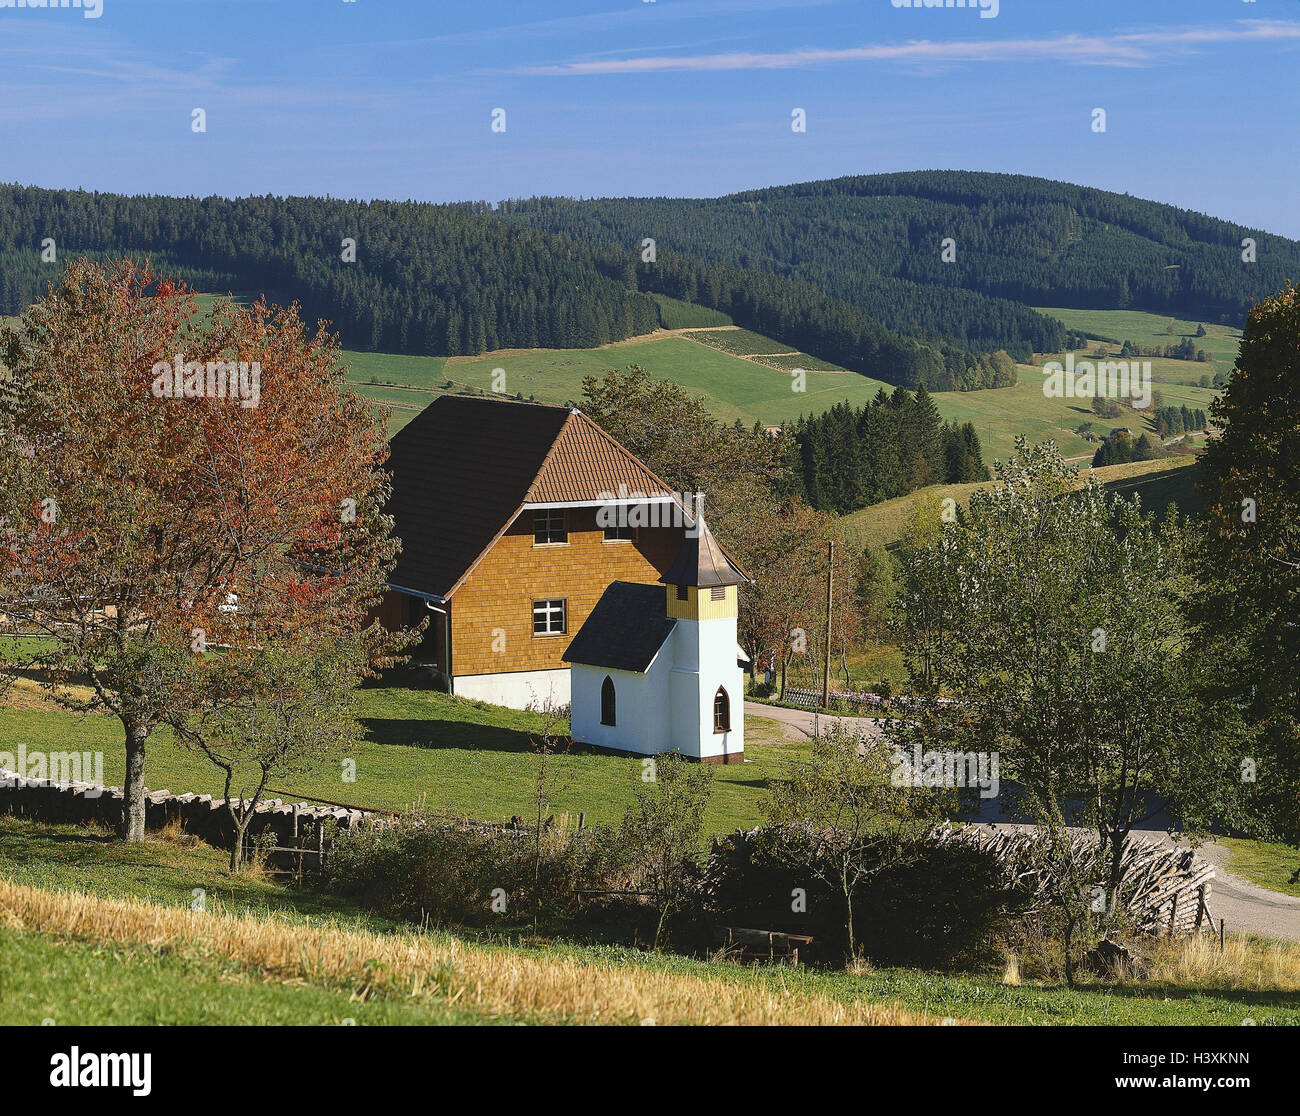 Germany, Black Forest, Jostal, umbel court, scenery, hill, wood, house, residential house, hipped roof, band, autumn Stock Photo